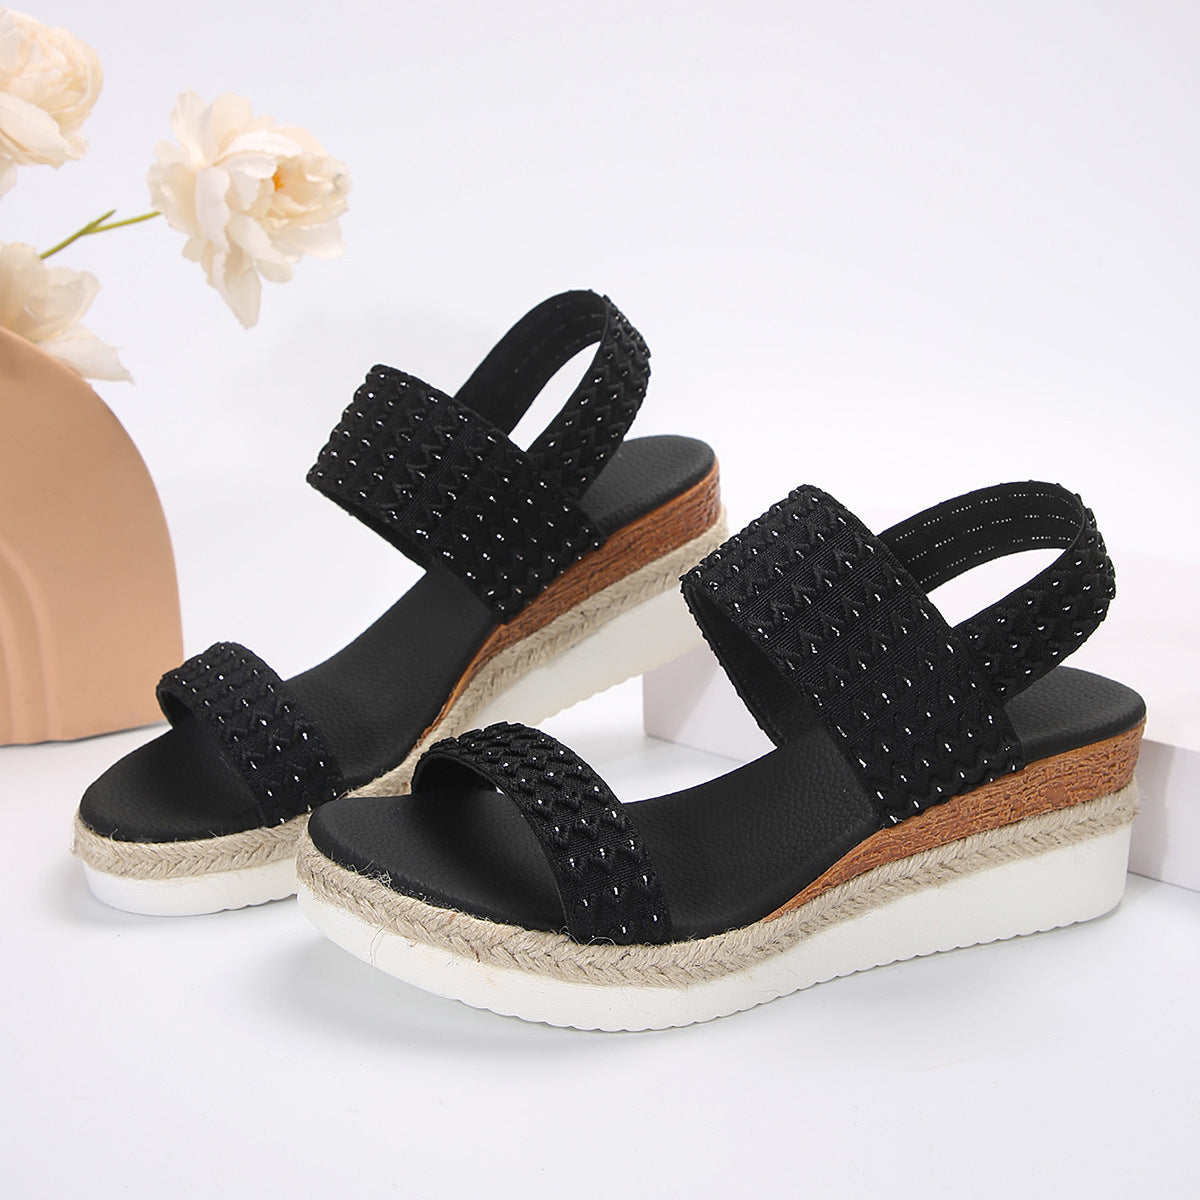 Wedge Sandals with Peep toe Shoes